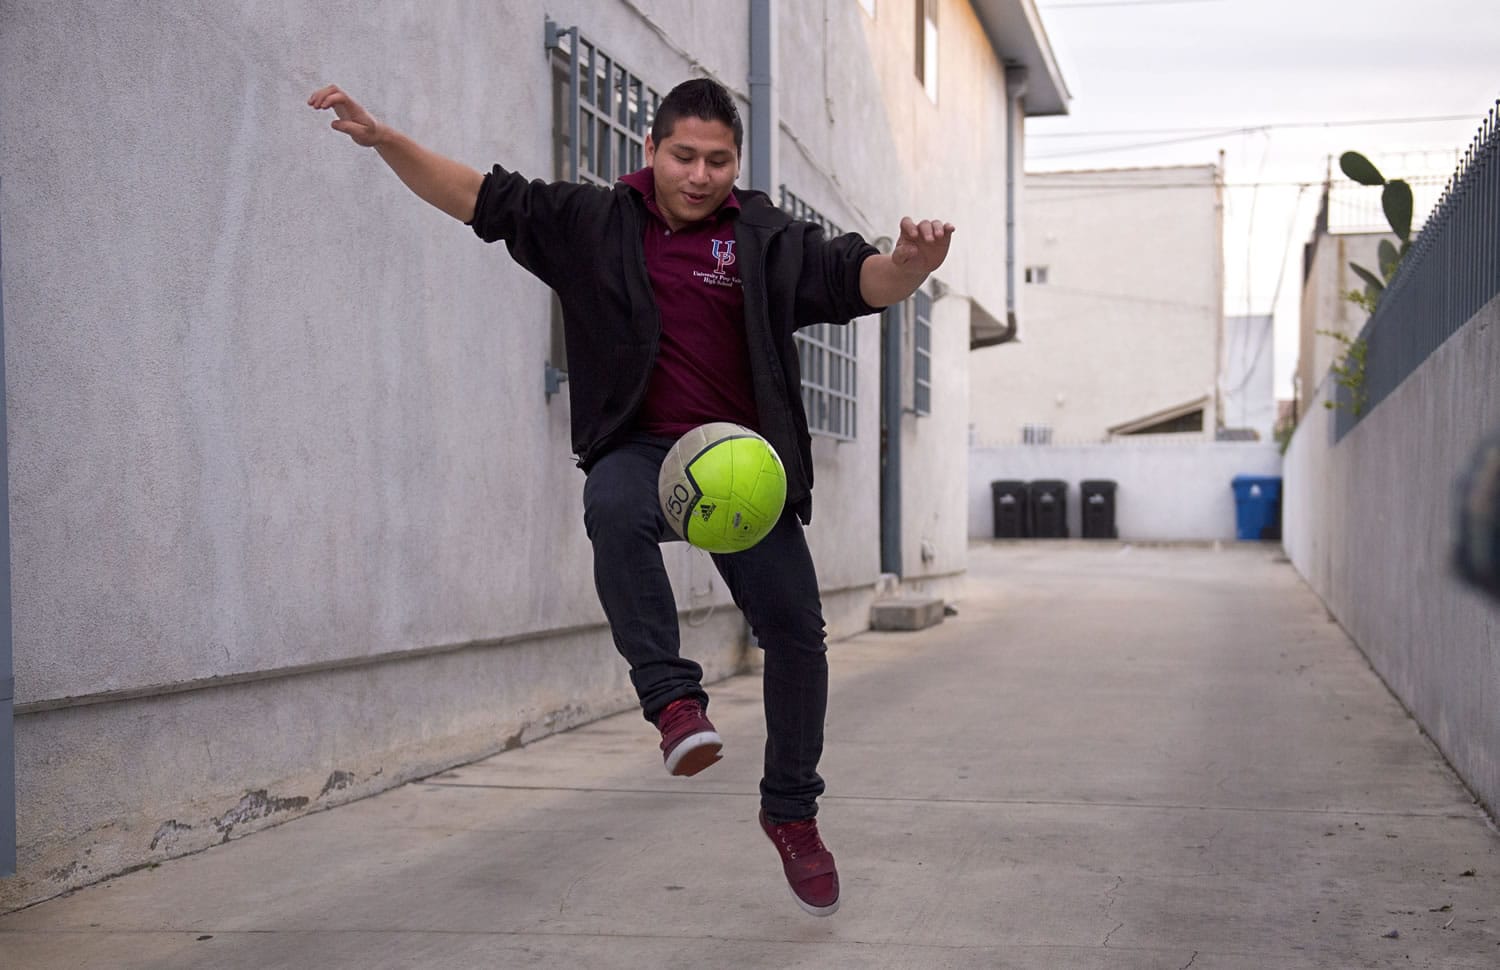 Marvin Velasco, 15, practices soccer outside his new home in Los Angeles on Monday. Velasco&#039;s perilous journey from Guatemala included crossing a river, even though he doesn&#039;t swim, and getting lost at night in a frigid desert. Once in the United States, he turned himself in to U.S. Border Patrol agents in Reynosa, Texas, and was sent to a shelter run by the U.S. Department of Health and Human Services&#039; Office of Refugee Resettlement. (AP Photo/Mark J.